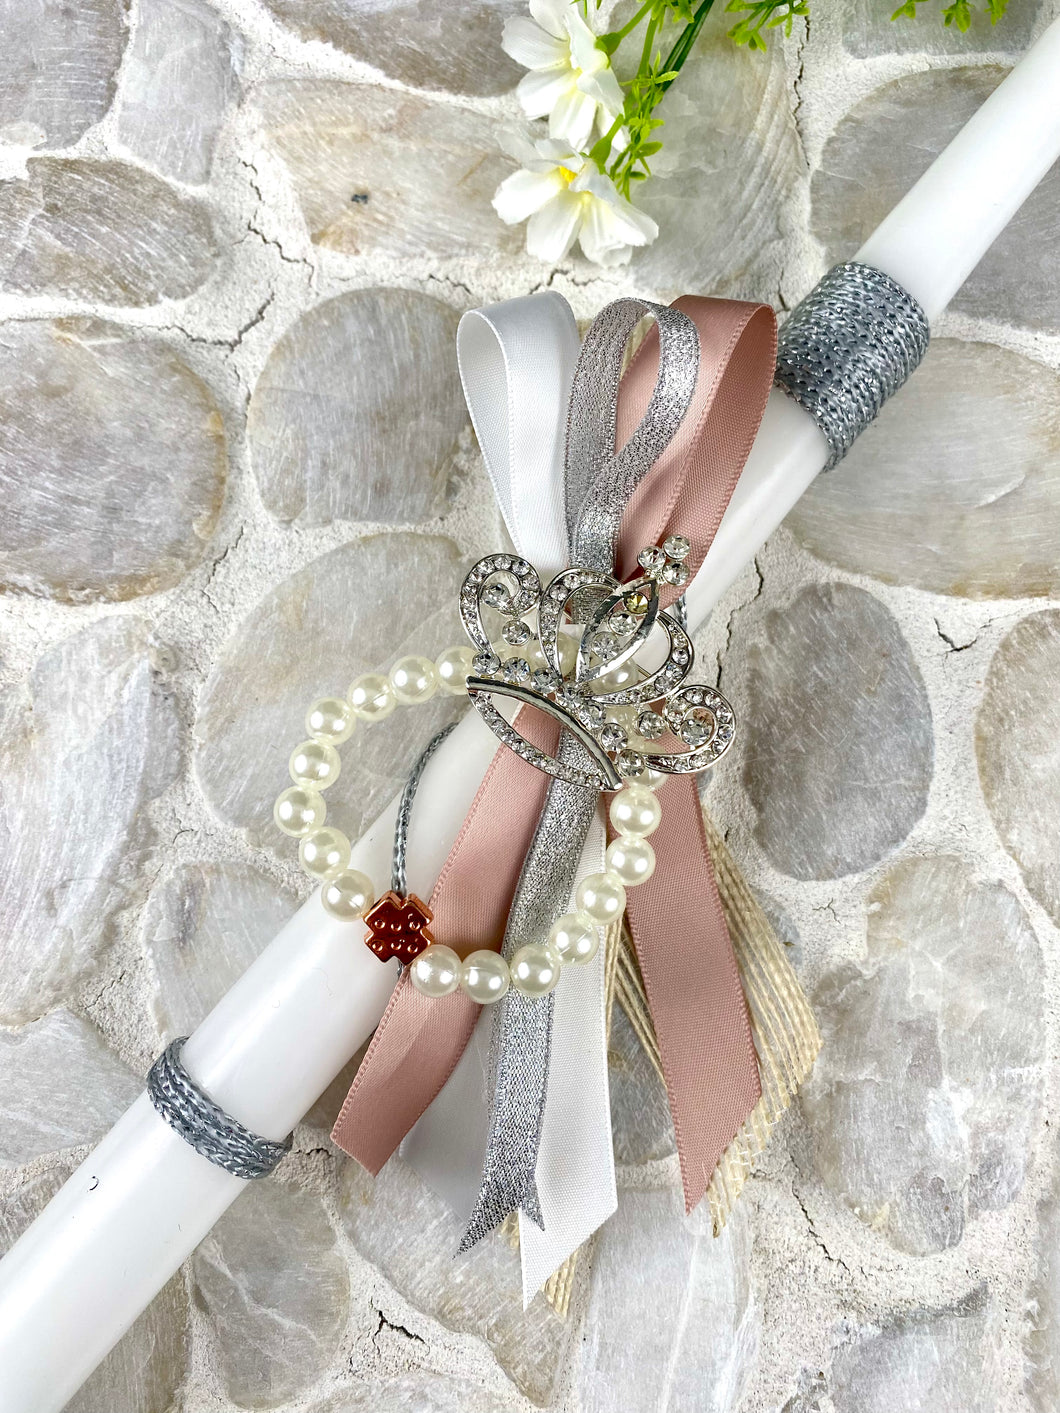 Corded Easter Candle with Rhinestone  Broach and Cross Bracelet EC202366